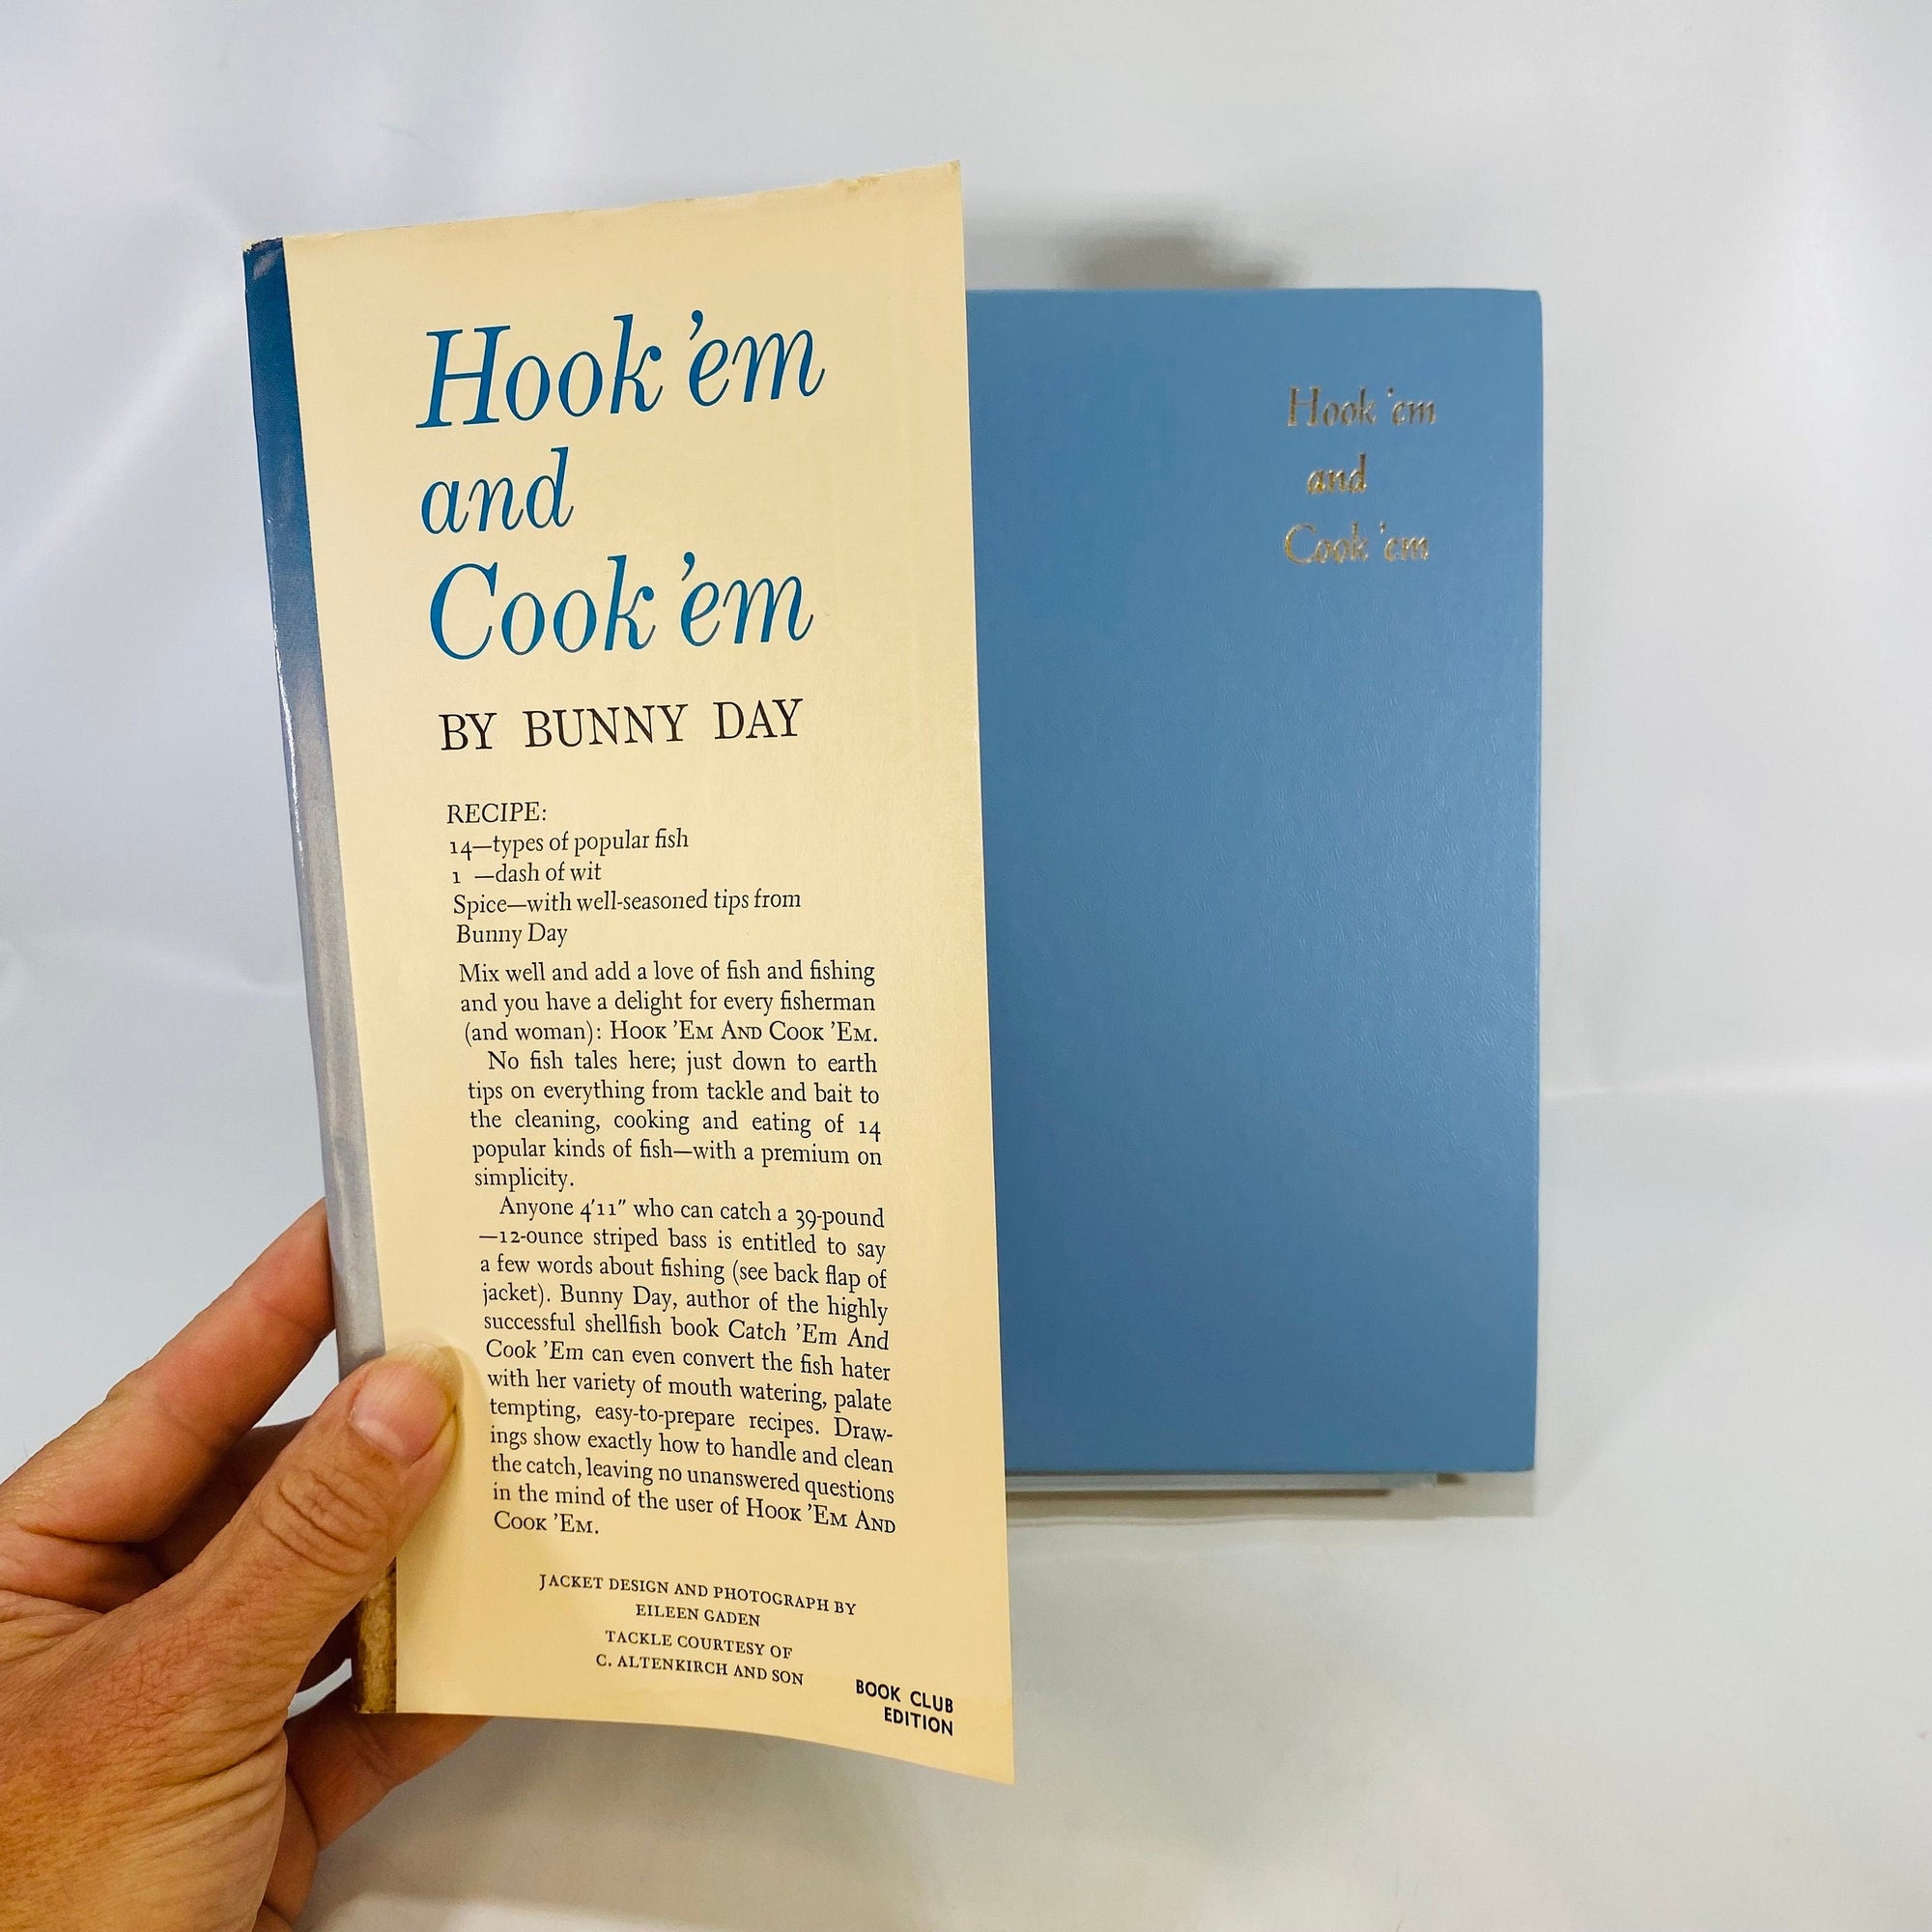 Hook 'em and Cook 'em A Cookbook by Bunny Day 1962 Doubleday and Company Vintage Cookbook Fresh Caught Fish Recipes